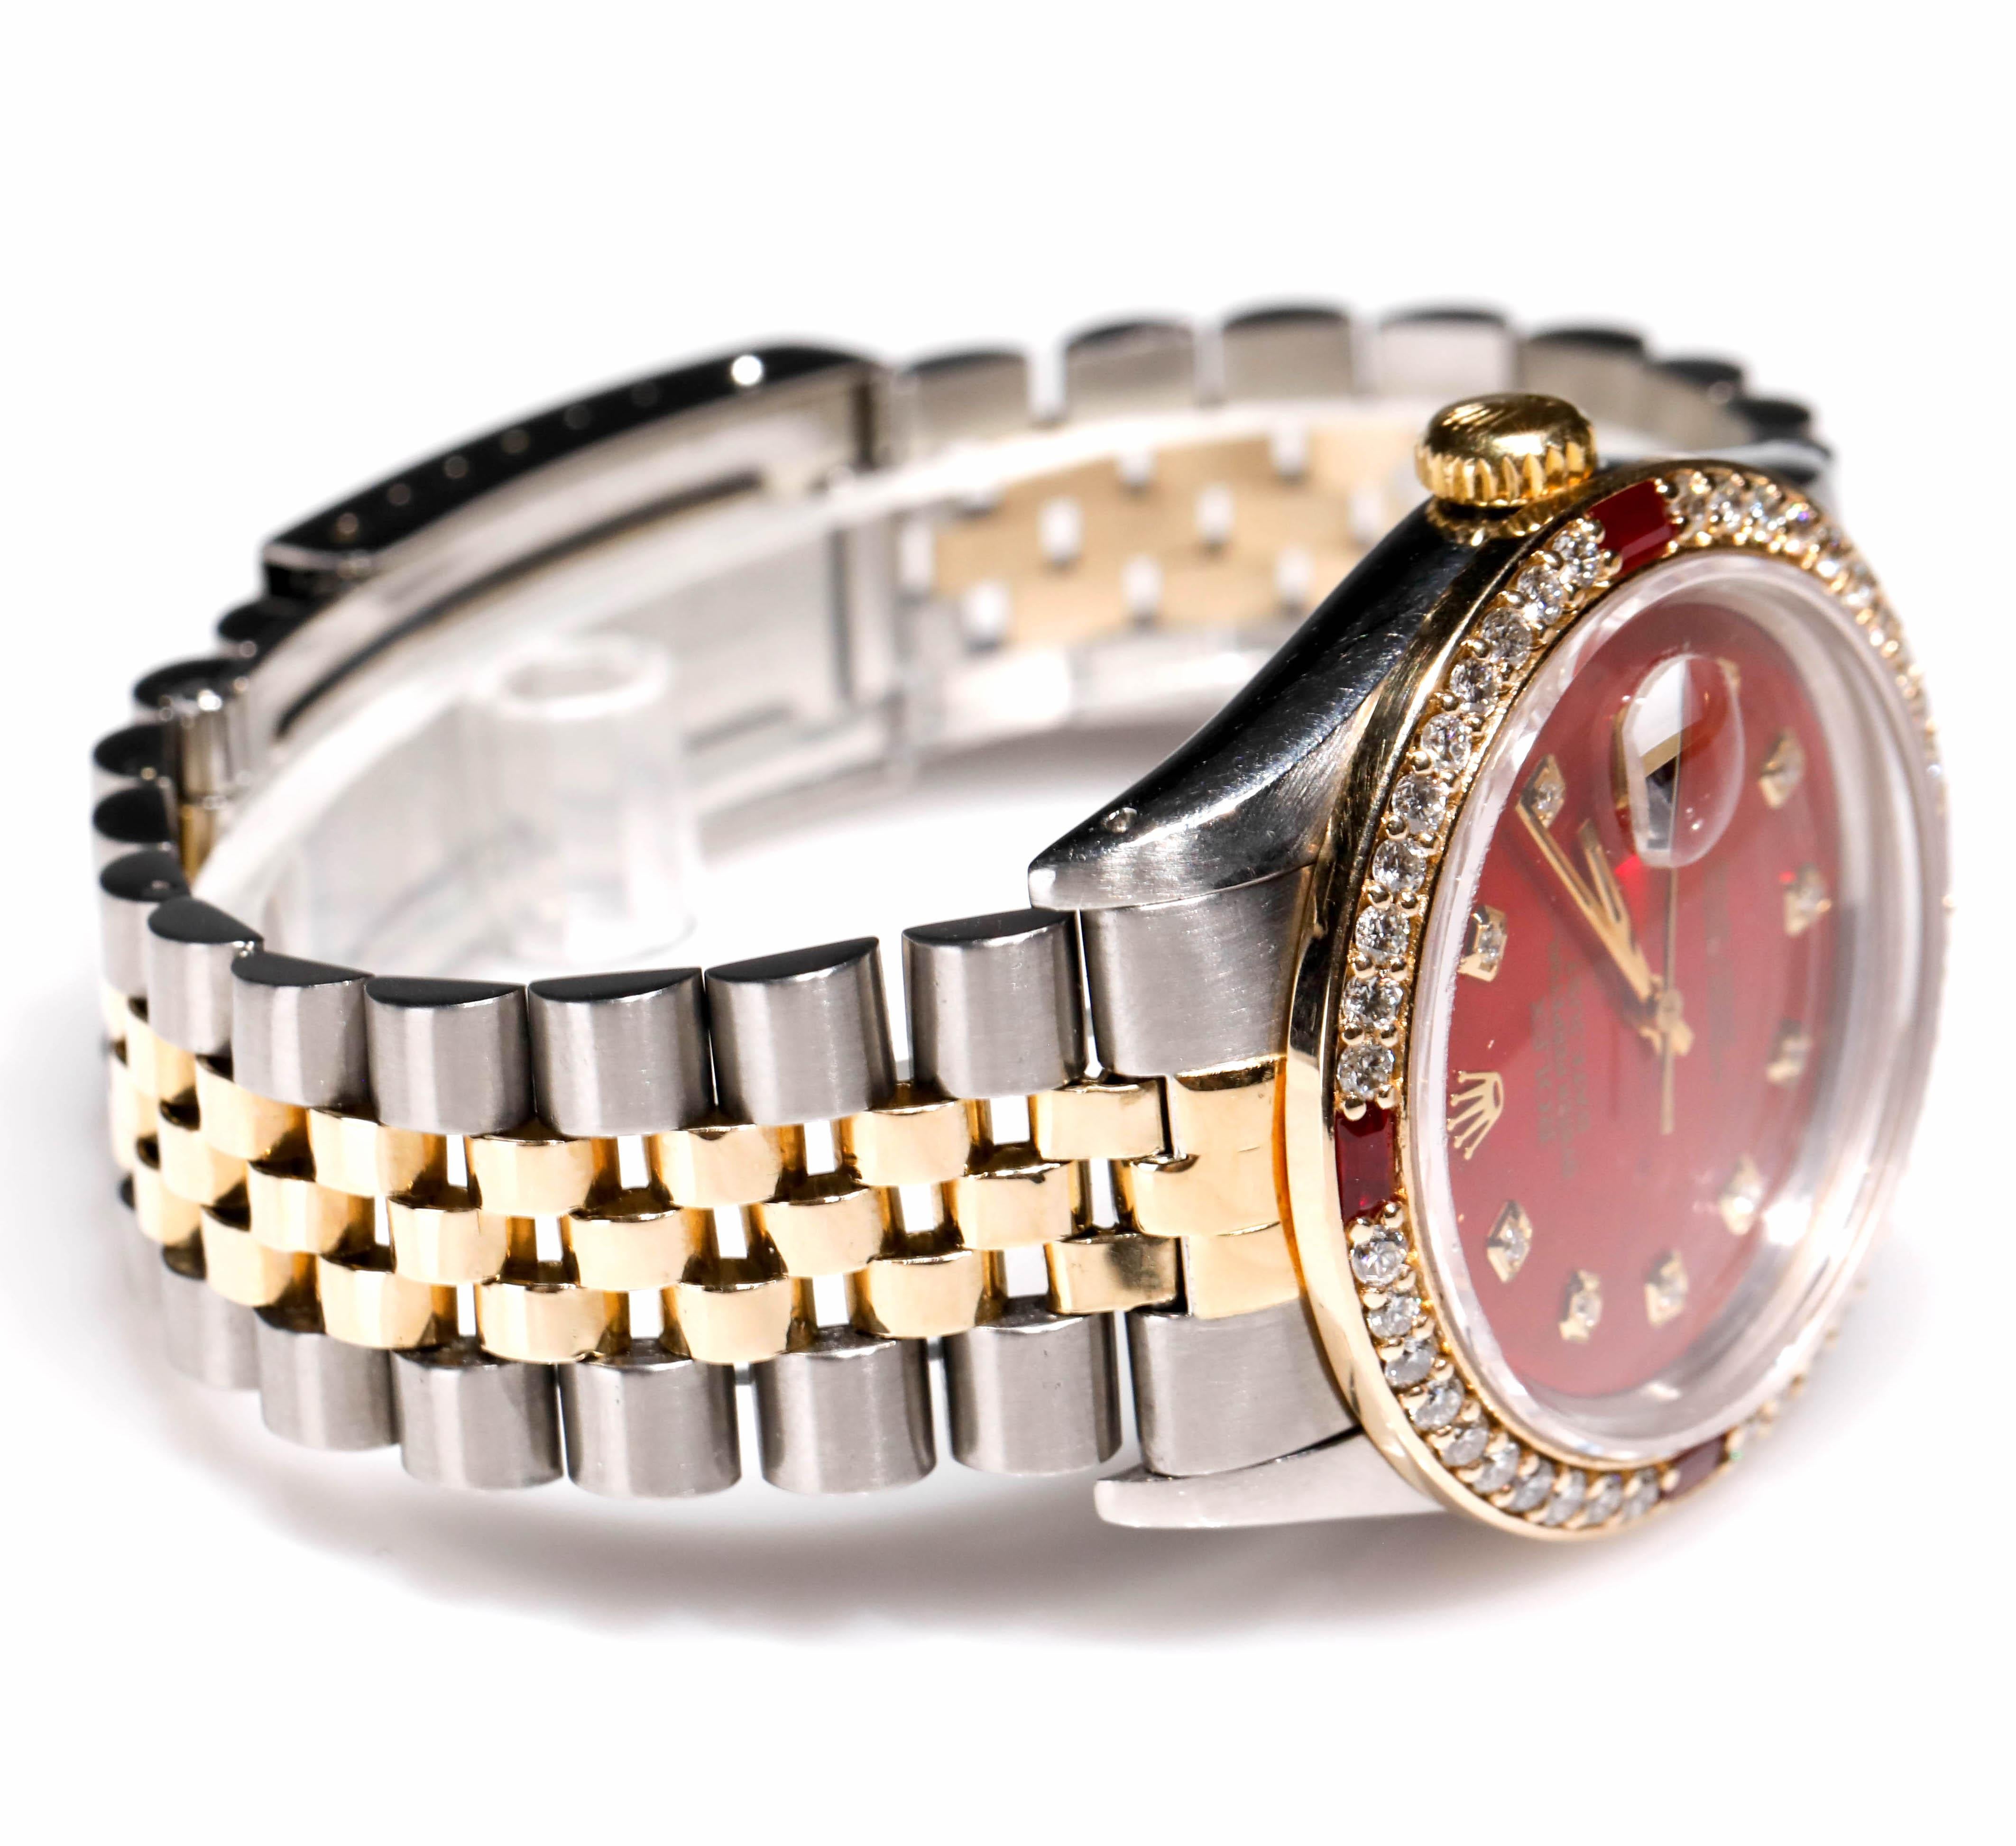 Rolex Datejust Men's Watch Custom Diamond Ruby Bezel Dial 18k Gold, Dated 1978
Rolex Two Tone Datejust Men's 1978, Automatic Diamond Ruby Dial 18 karat Gold

SKU: WA00014

PRIMARY DETAILS
Brand:  Rolex
Model: OYSTER PREPETUAL DATEJUST OFFICIALLY